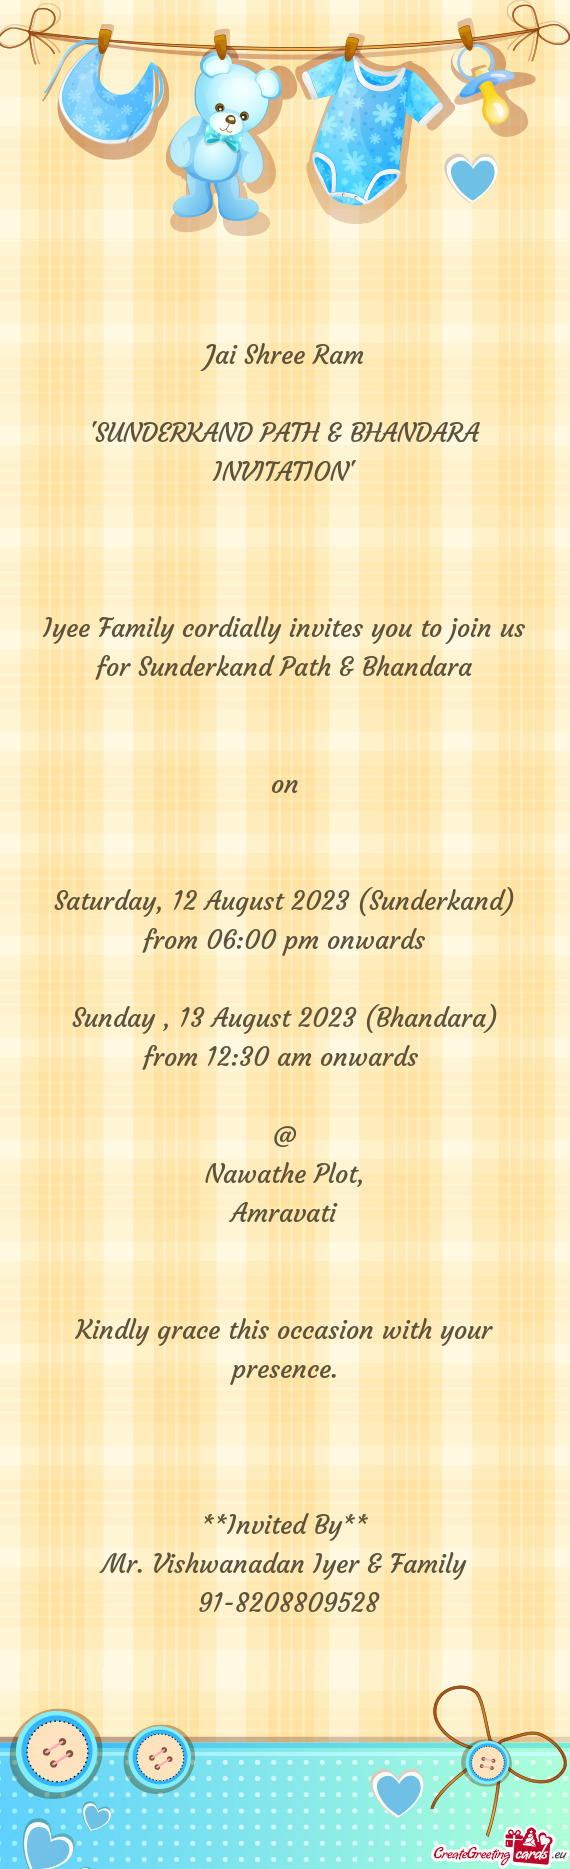 Iyee Family cordially invites you to join us for Sunderkand Path & Bhandara